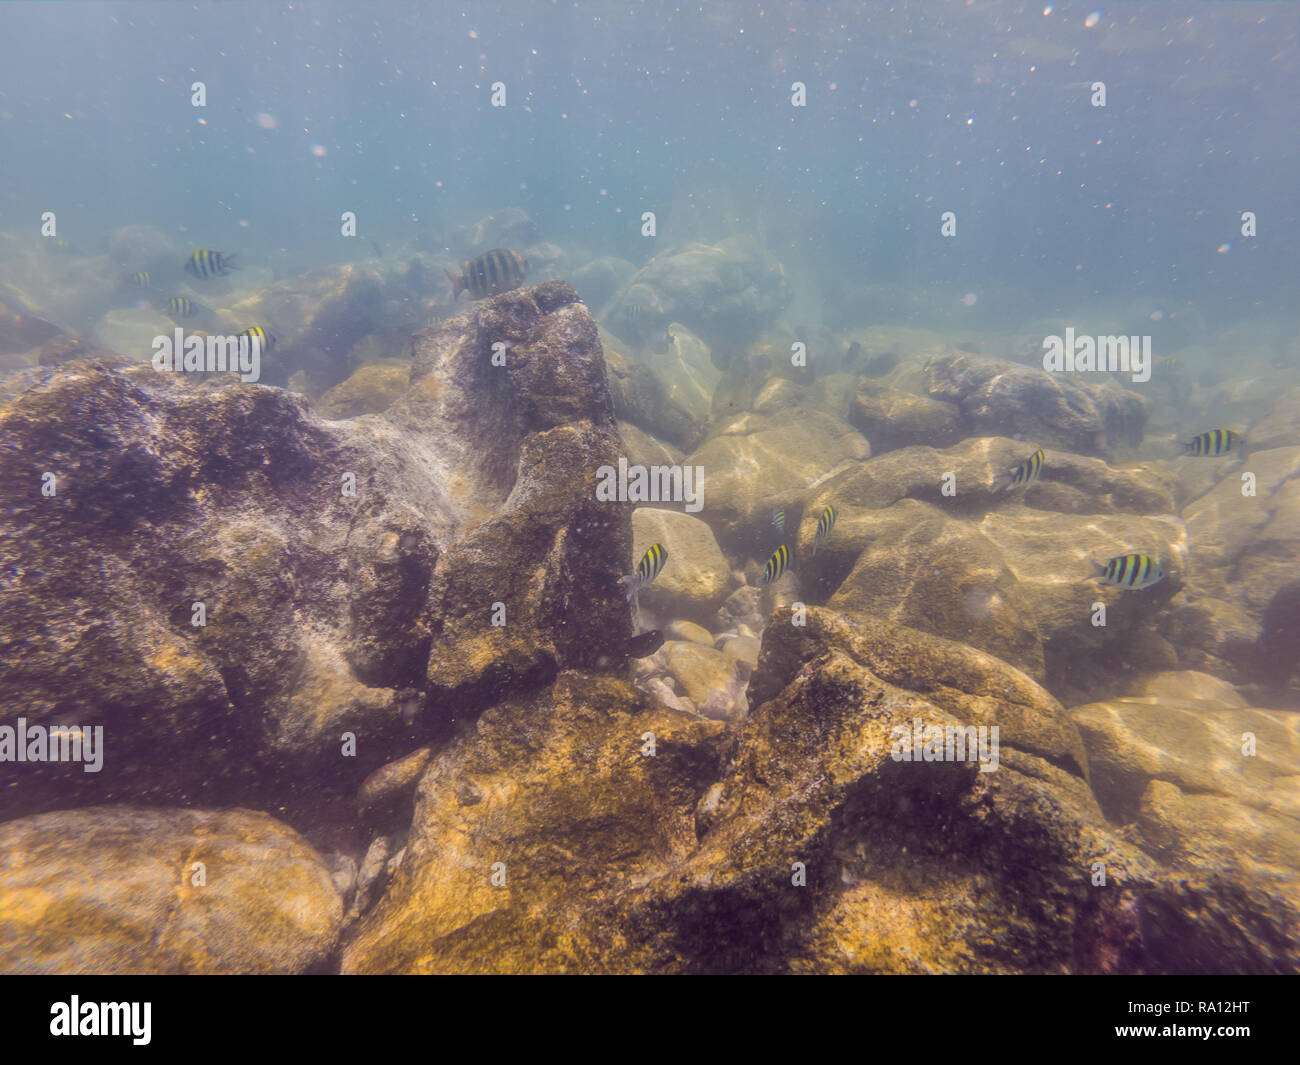 Under Sea Garden High Resolution Stock Photography and Images - Alamy